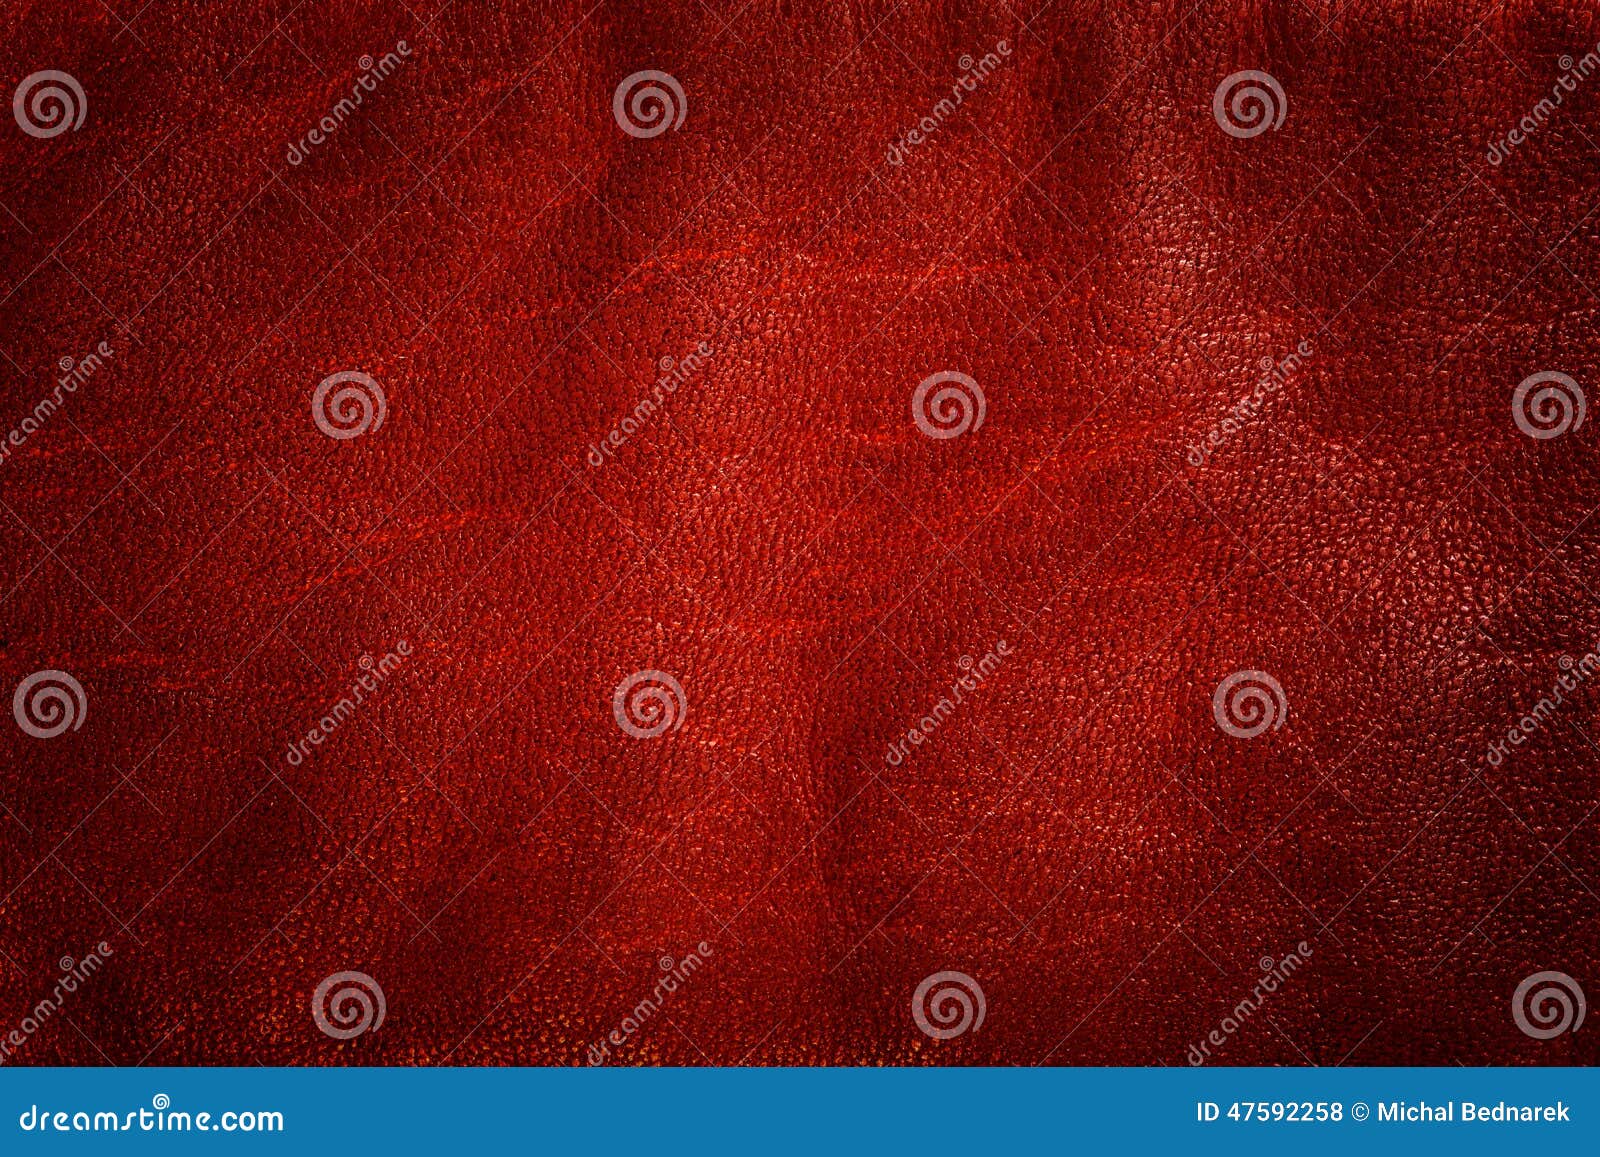 genuine red leather background, pattern, texture.